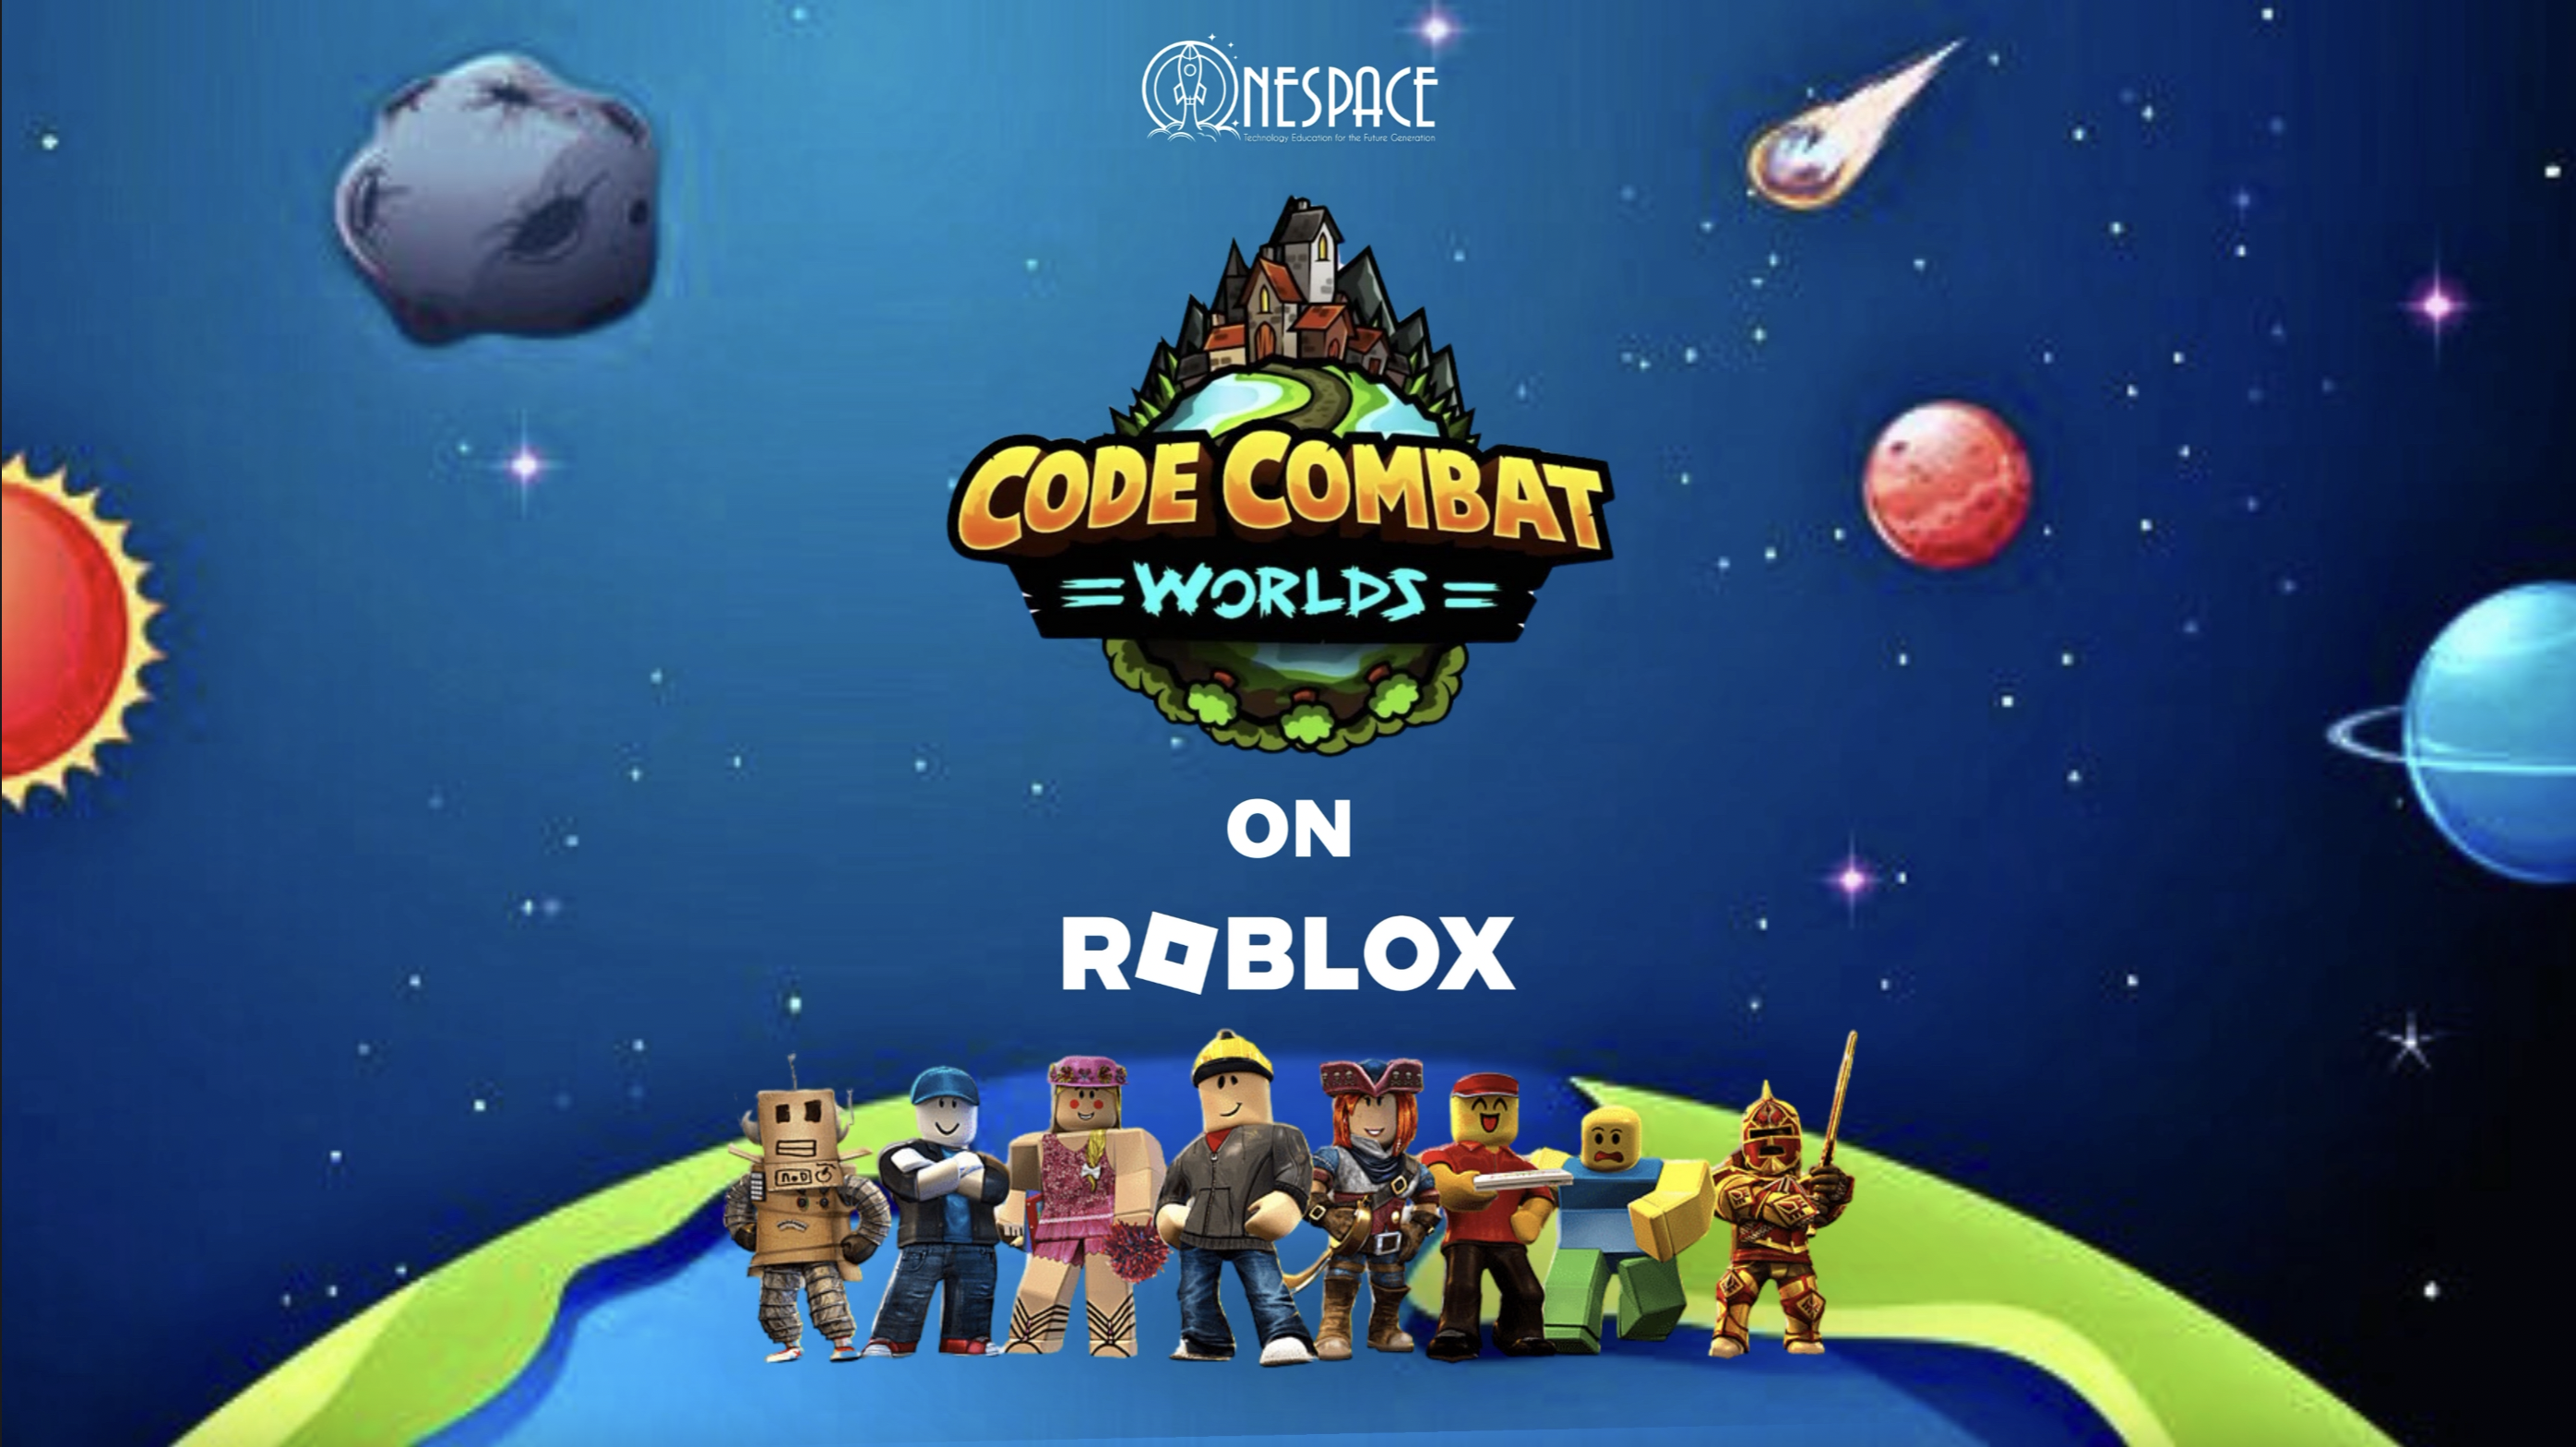 CODE COMBAT ON ROBLOX: EXPERIENCE – CREATING THE 3D GAMING WORLDCODE